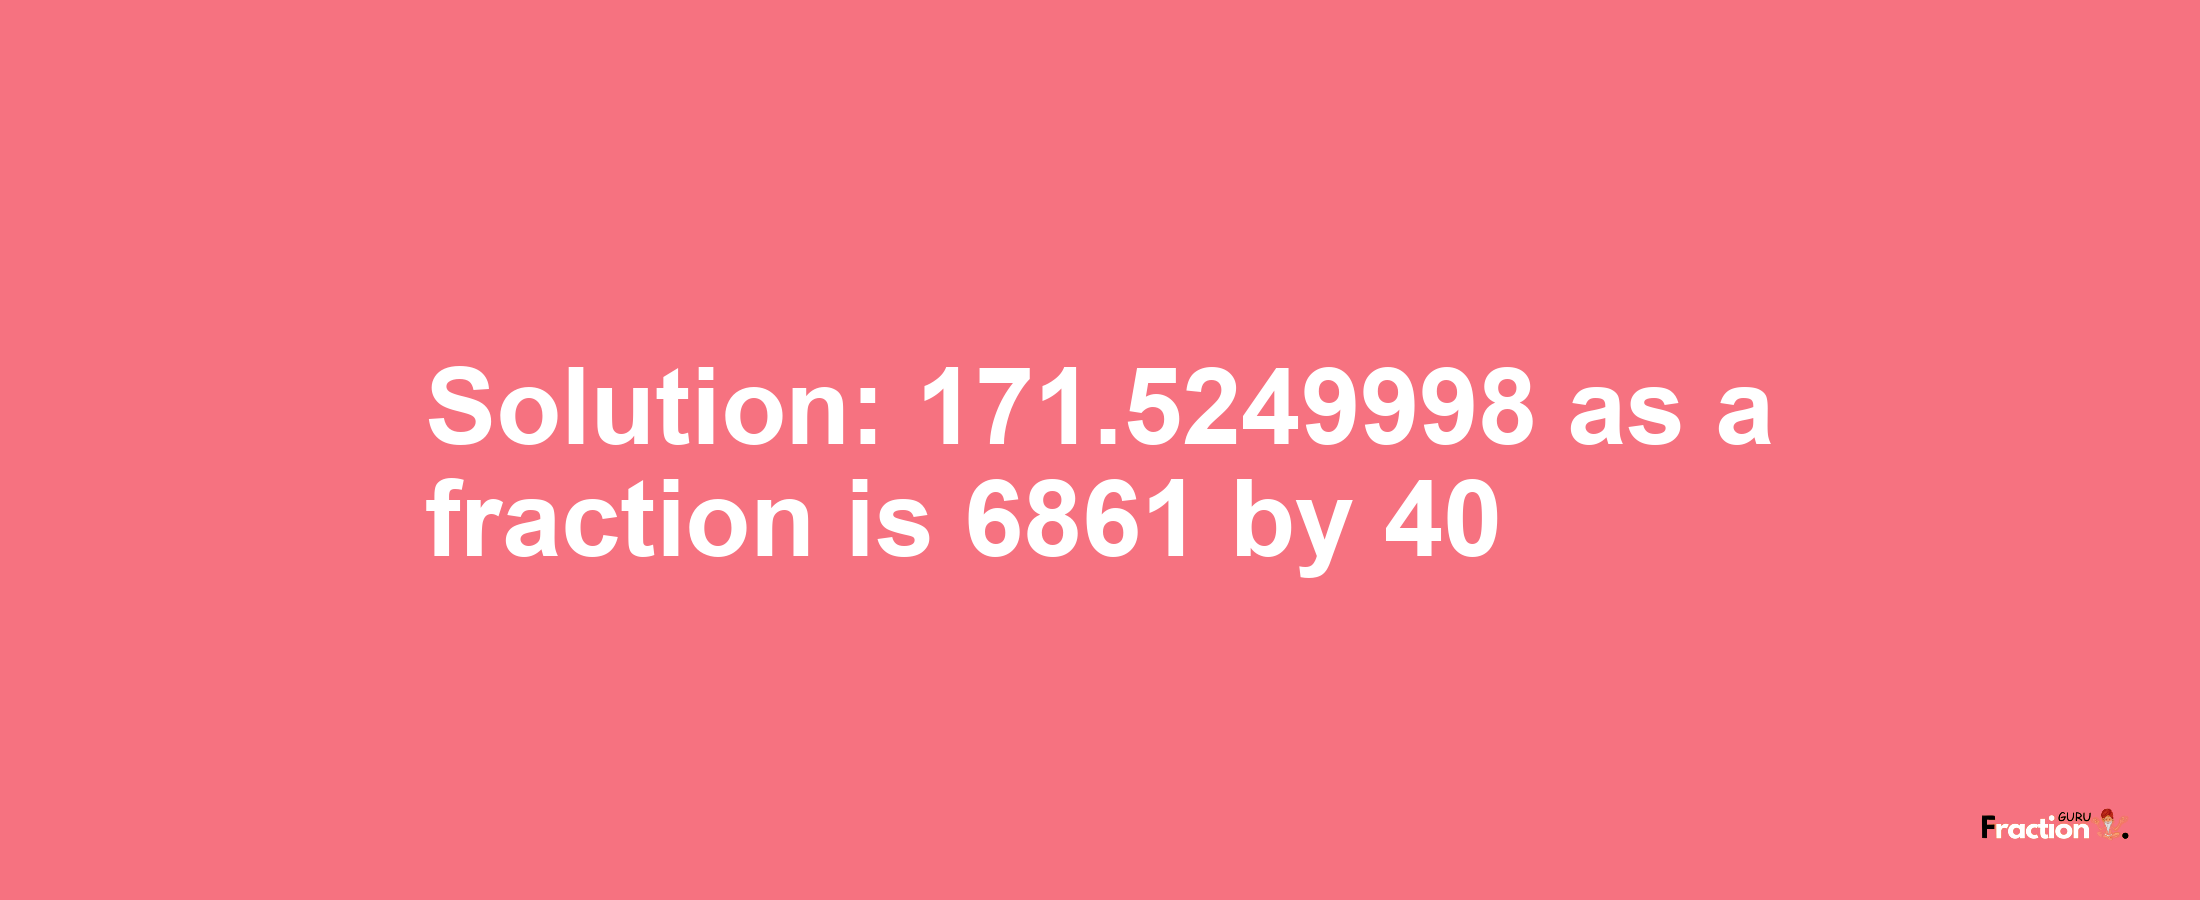 Solution:171.5249998 as a fraction is 6861/40